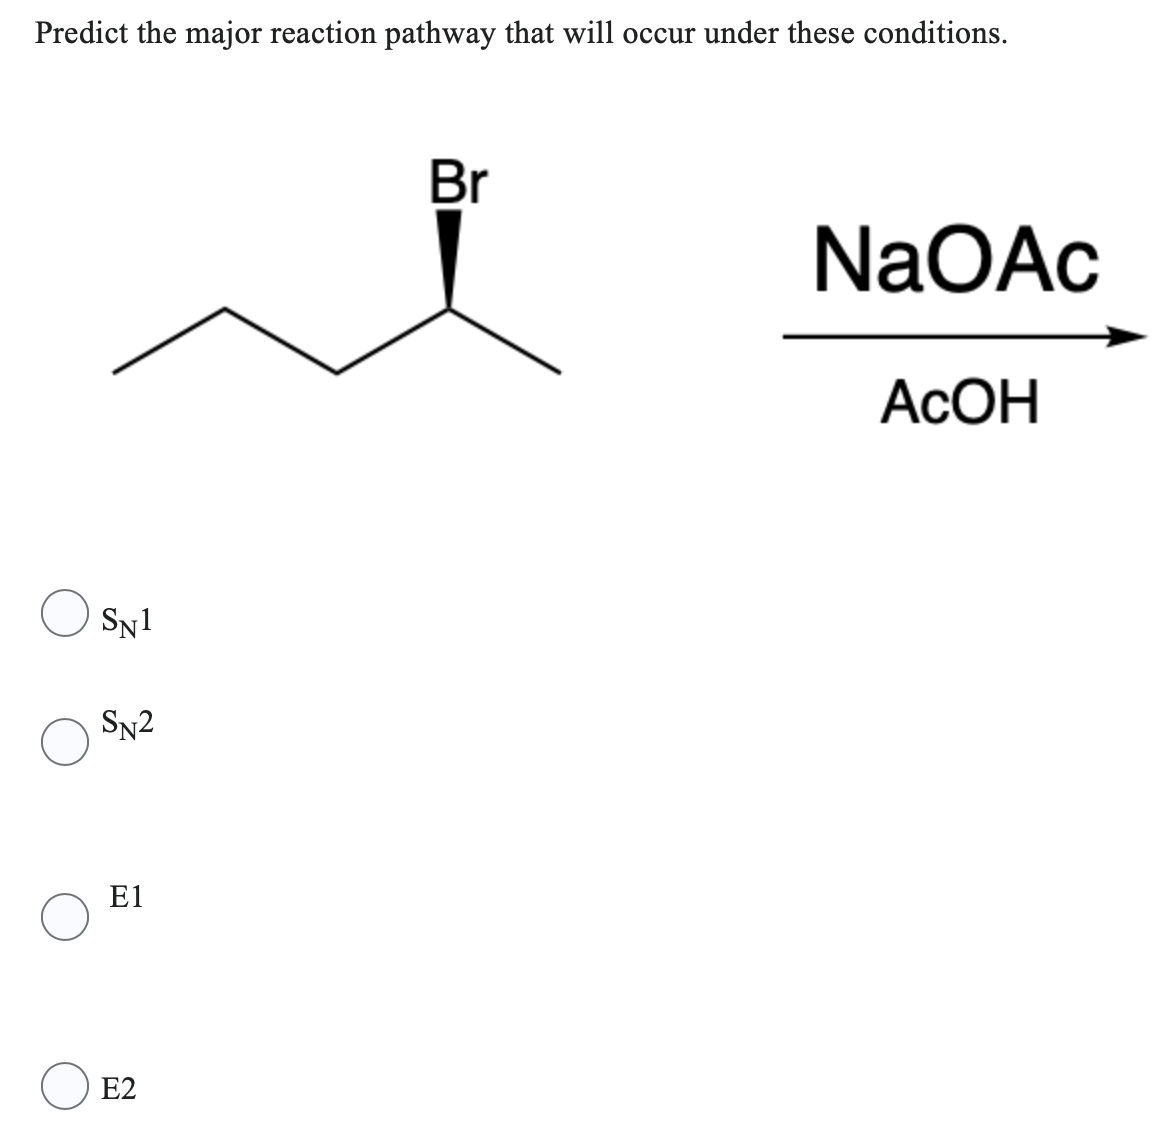 Predict the major reaction pathway that will occur under these conditions.
SN1
SN2
E1
E2
Br
NaOAc
ACOH